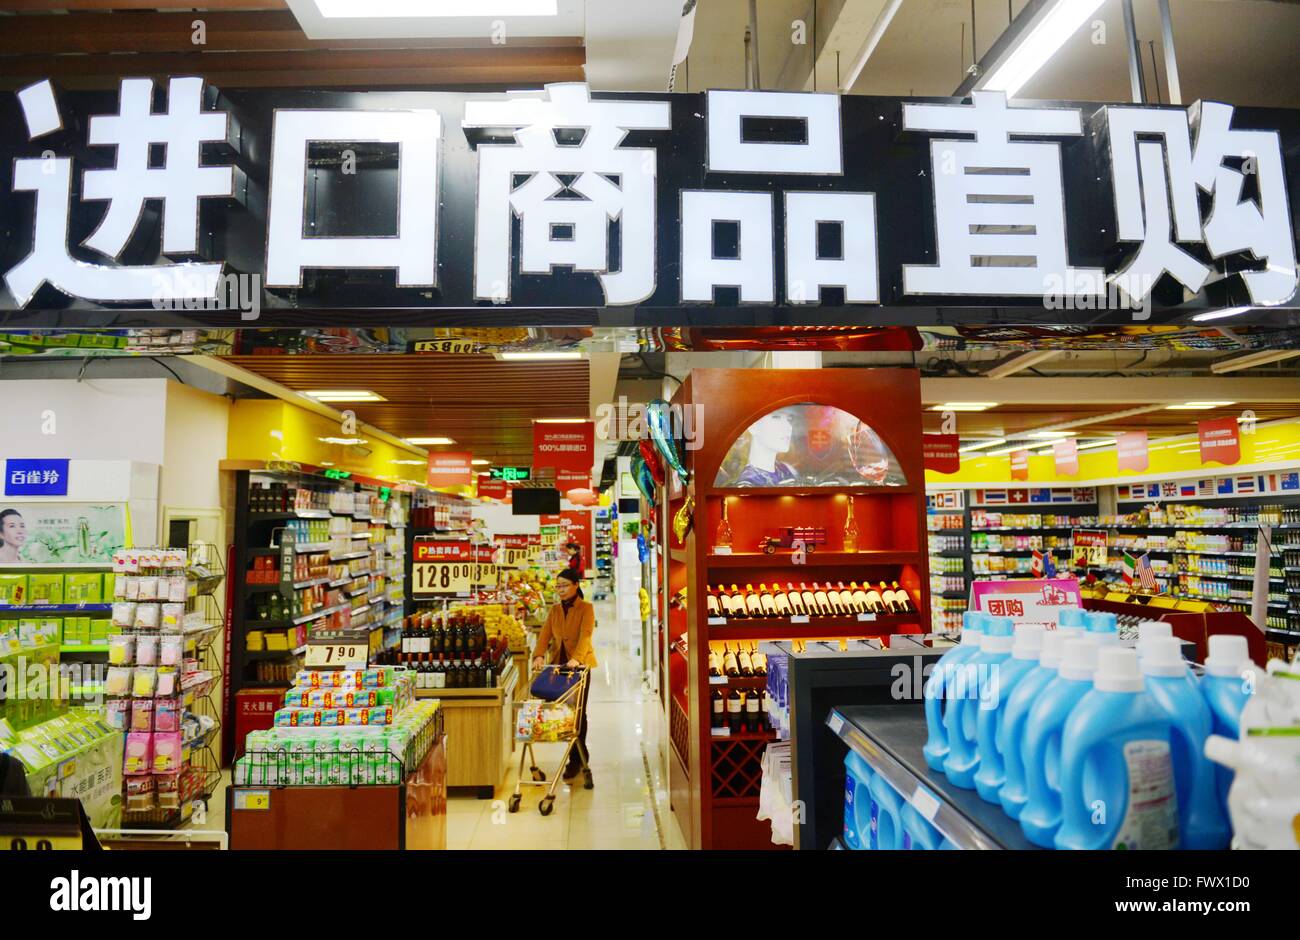 (160408) -- SHIJIAZHUANG, April 8, 2016 (Xinhua) -- A consumer selects articles at a purchase center of imported goods in Shijiazhuang, capital of north China's Hebei Province, April 8, 2016. China changed the tax rules on online retail goods from April 8 to level the playing field for e-commerce platforms and traditional retailers and importers. Retail goods purchased online will no longer be classified as "parcels," which enjoy a "parcel tax" rate, lower than that on other imported goods. Instead, online purchases from overseas will be charged in the same way as any other imported goods. (Xi Stock Photo